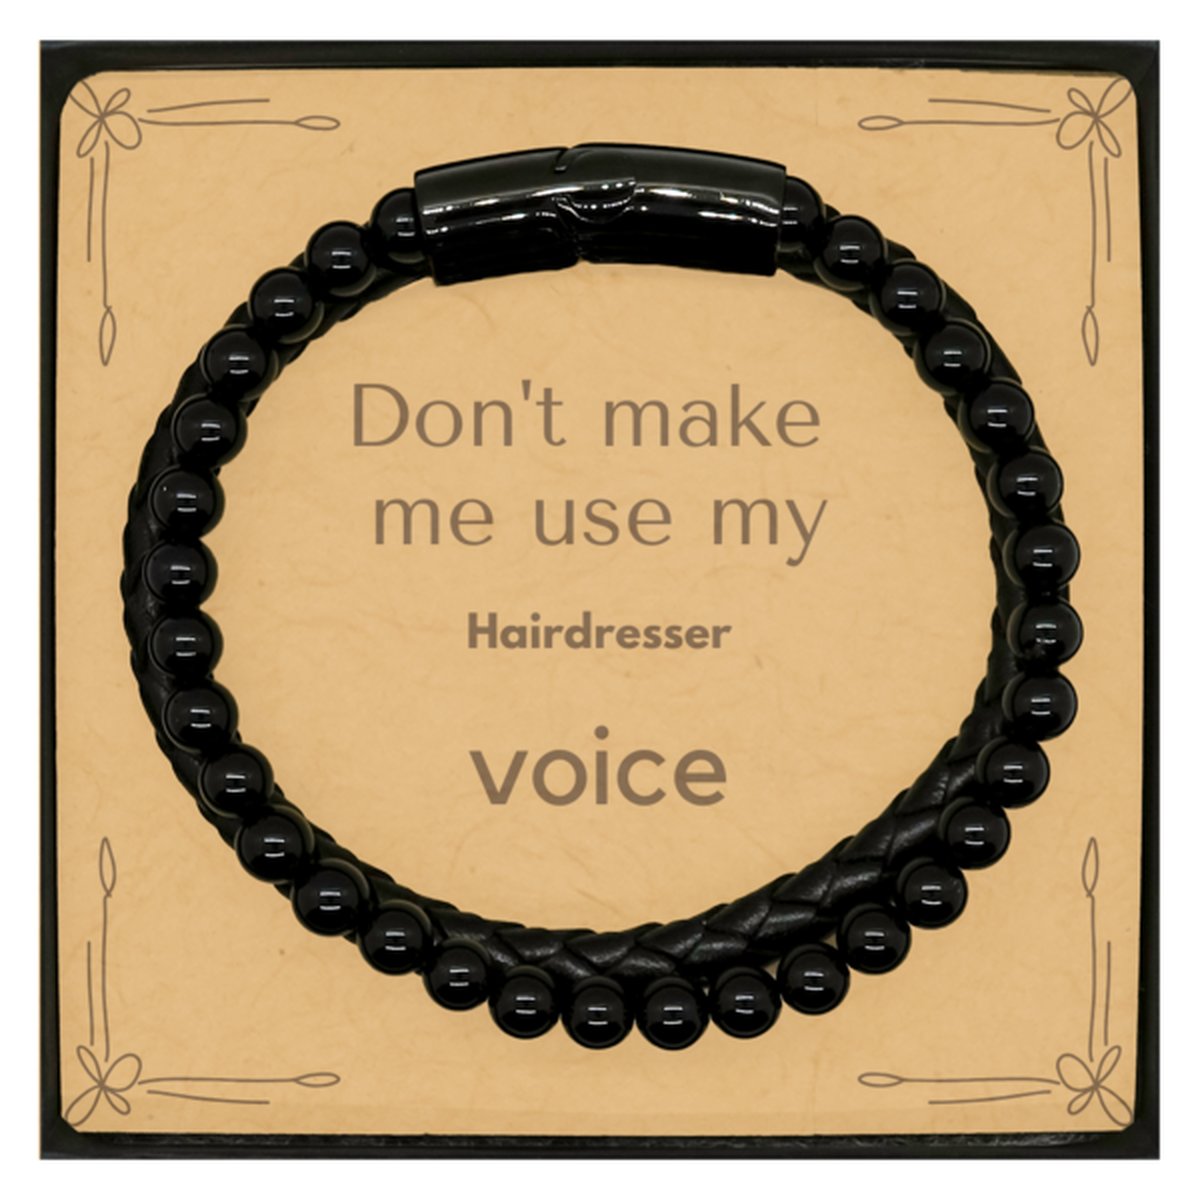 Don't make me use my Hairdresser voice, Sarcasm Hairdresser Card Gifts, Christmas Hairdresser Stone Leather Bracelets Birthday Unique Gifts For Hairdresser Coworkers, Men, Women, Colleague, Friends